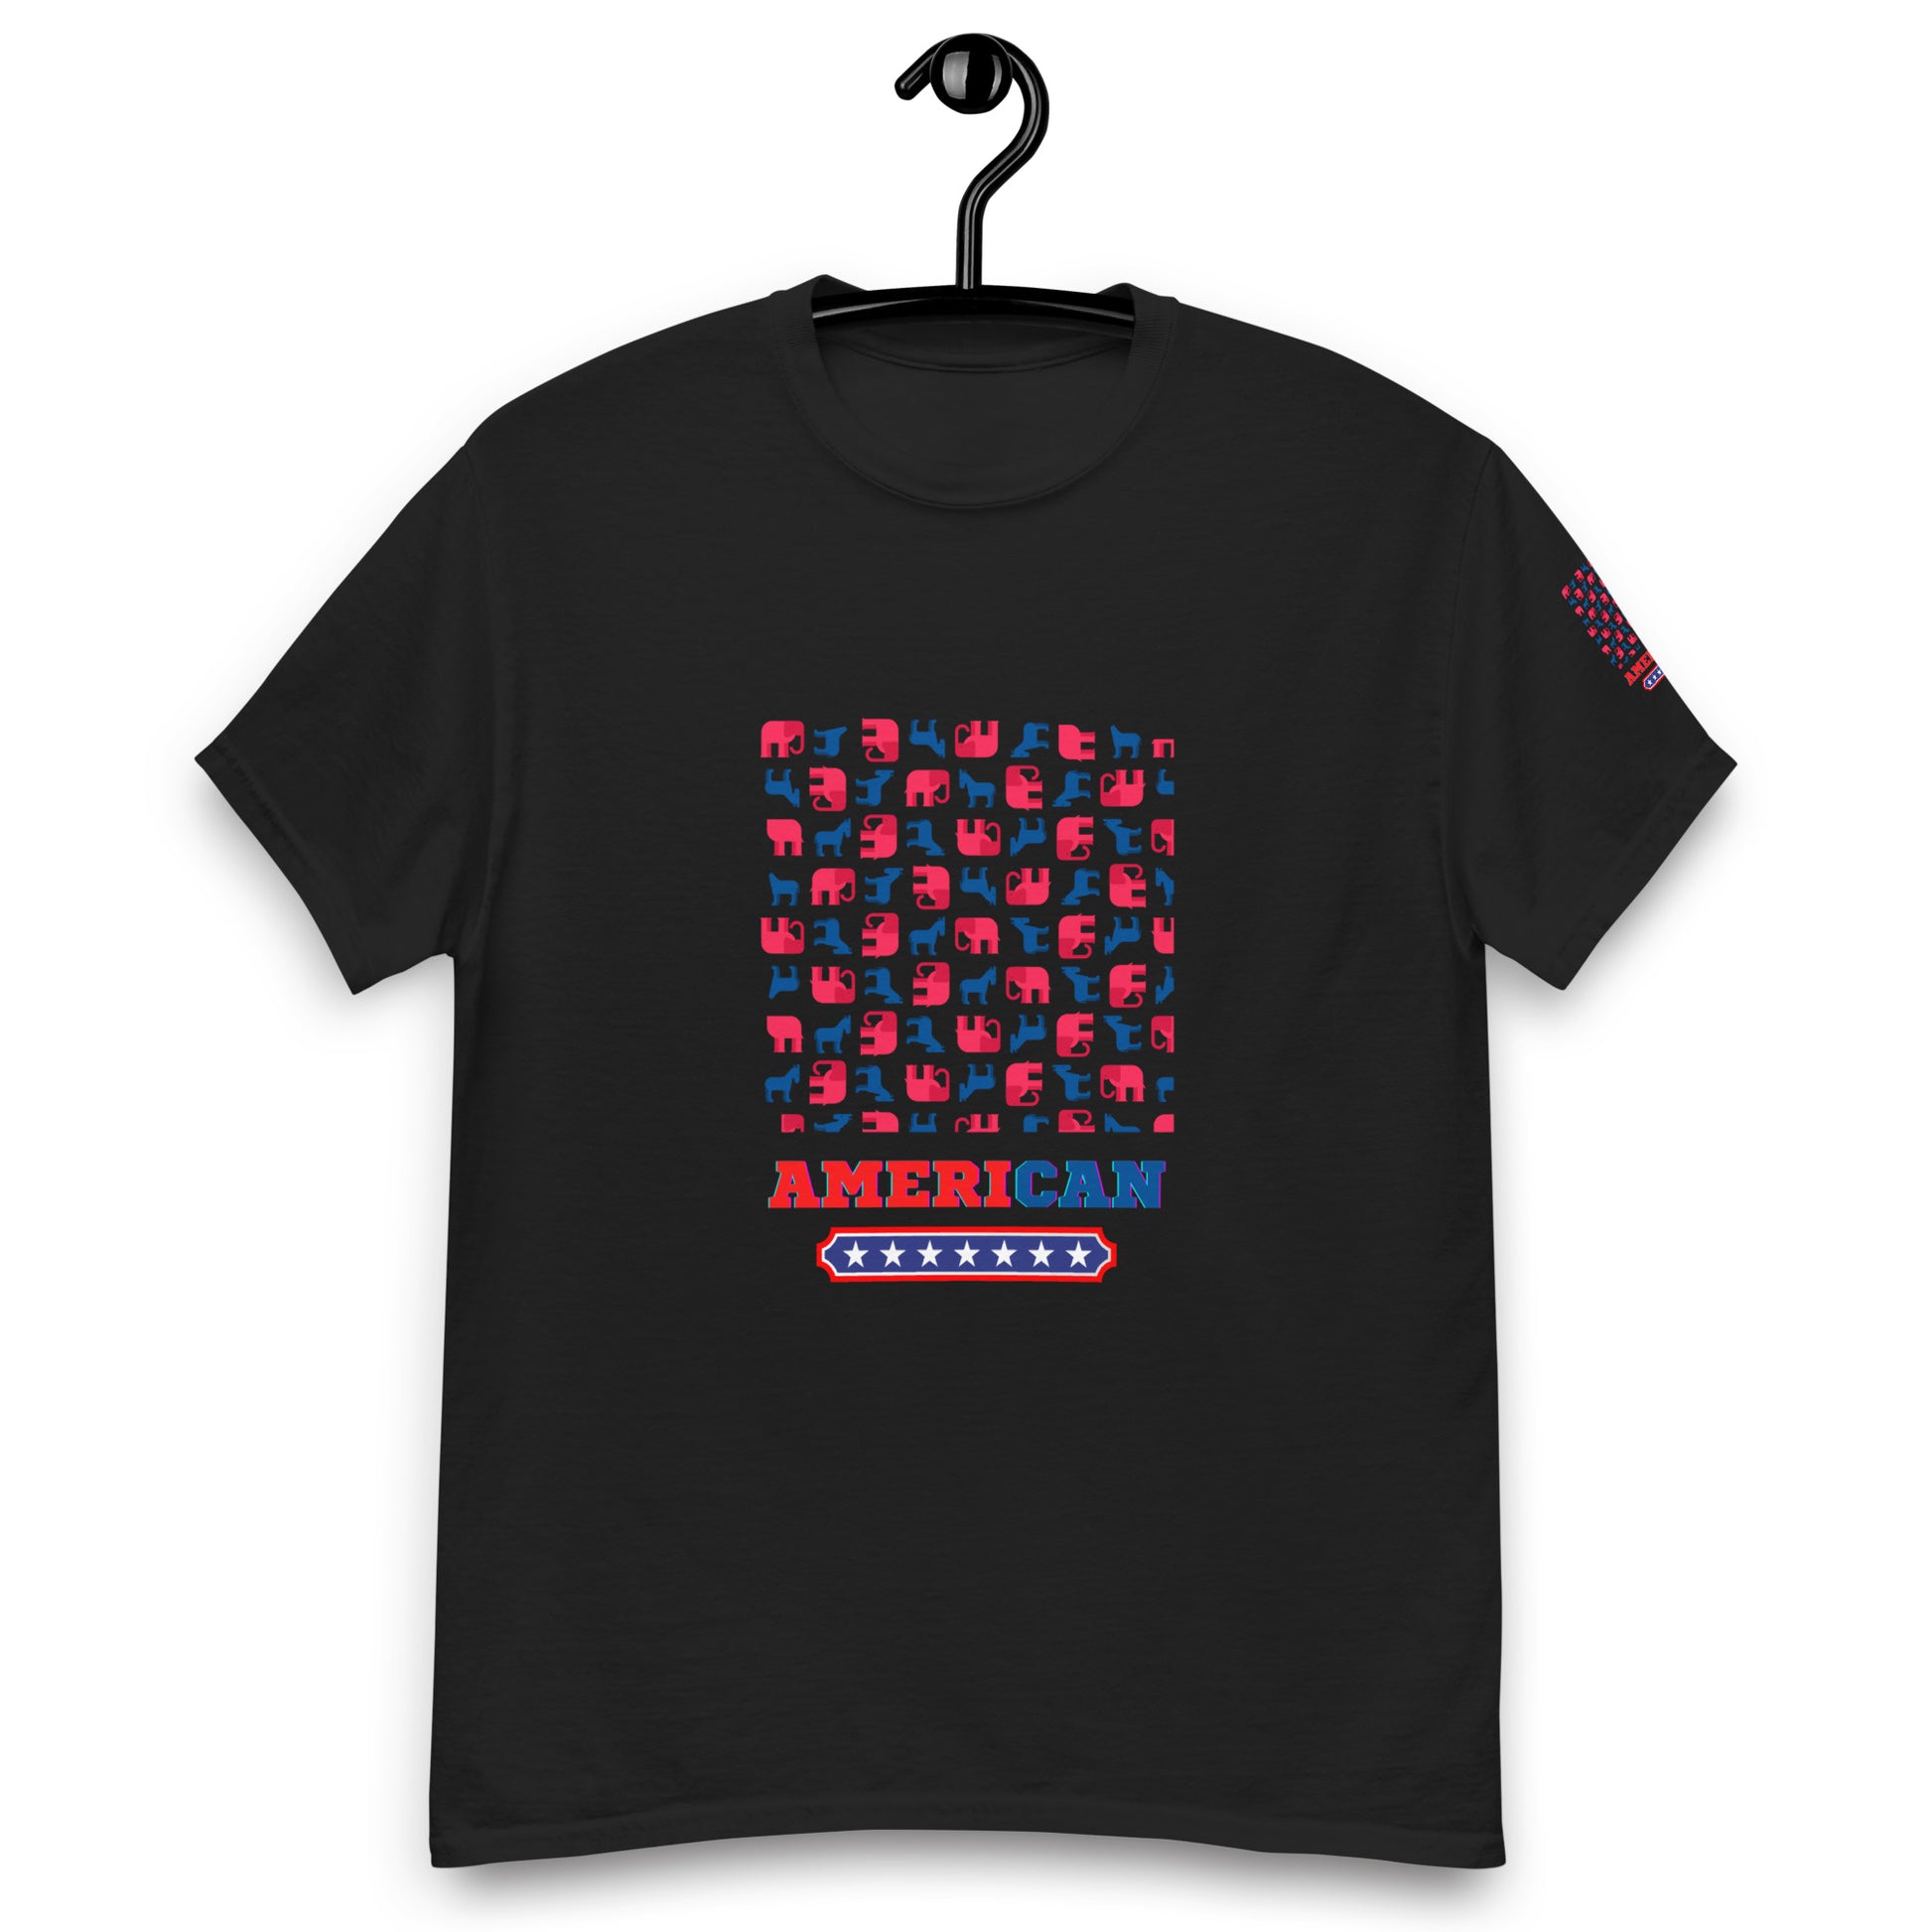 AMERICAN STYLE T–SHIRT "ELEPHANT - THEMED" BLACK FRONT - www.firstamericanstore.com